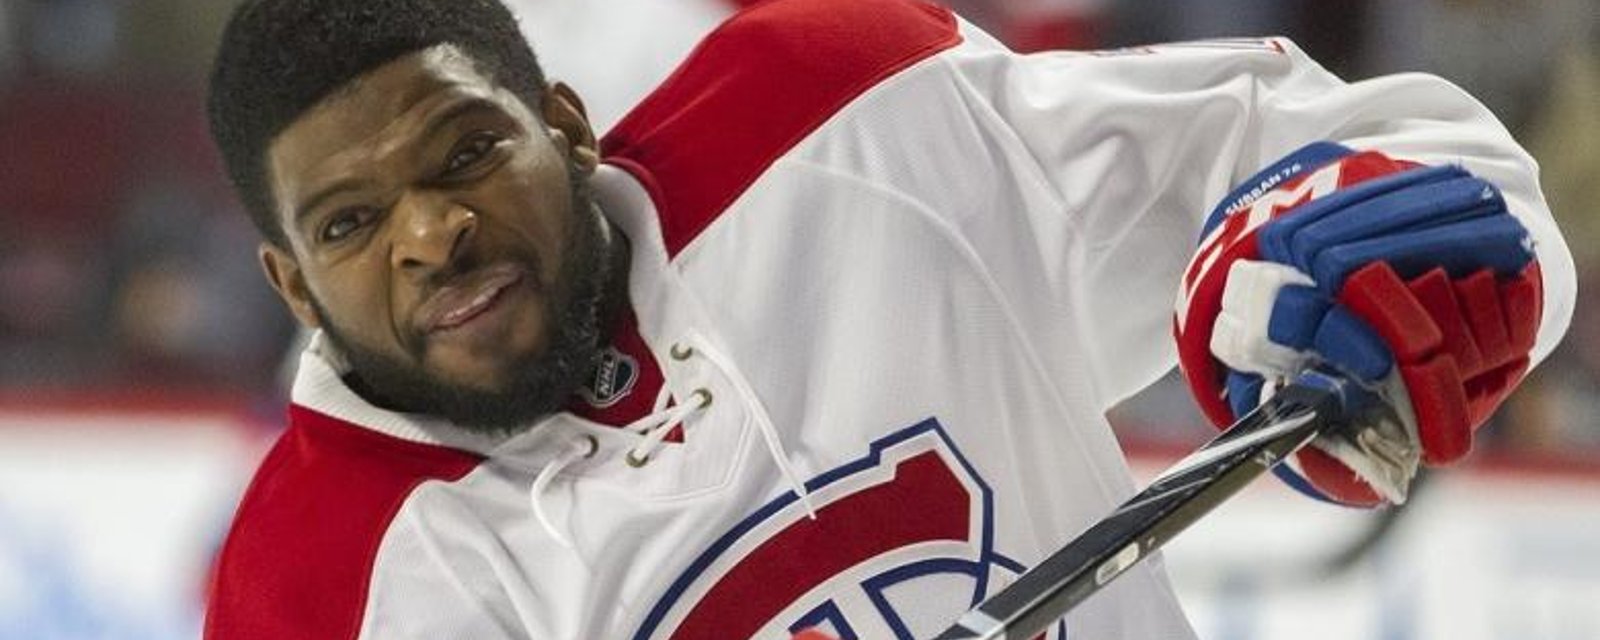 P.K. Subban appears to take a brutal shot at the Canadiens following his trade.